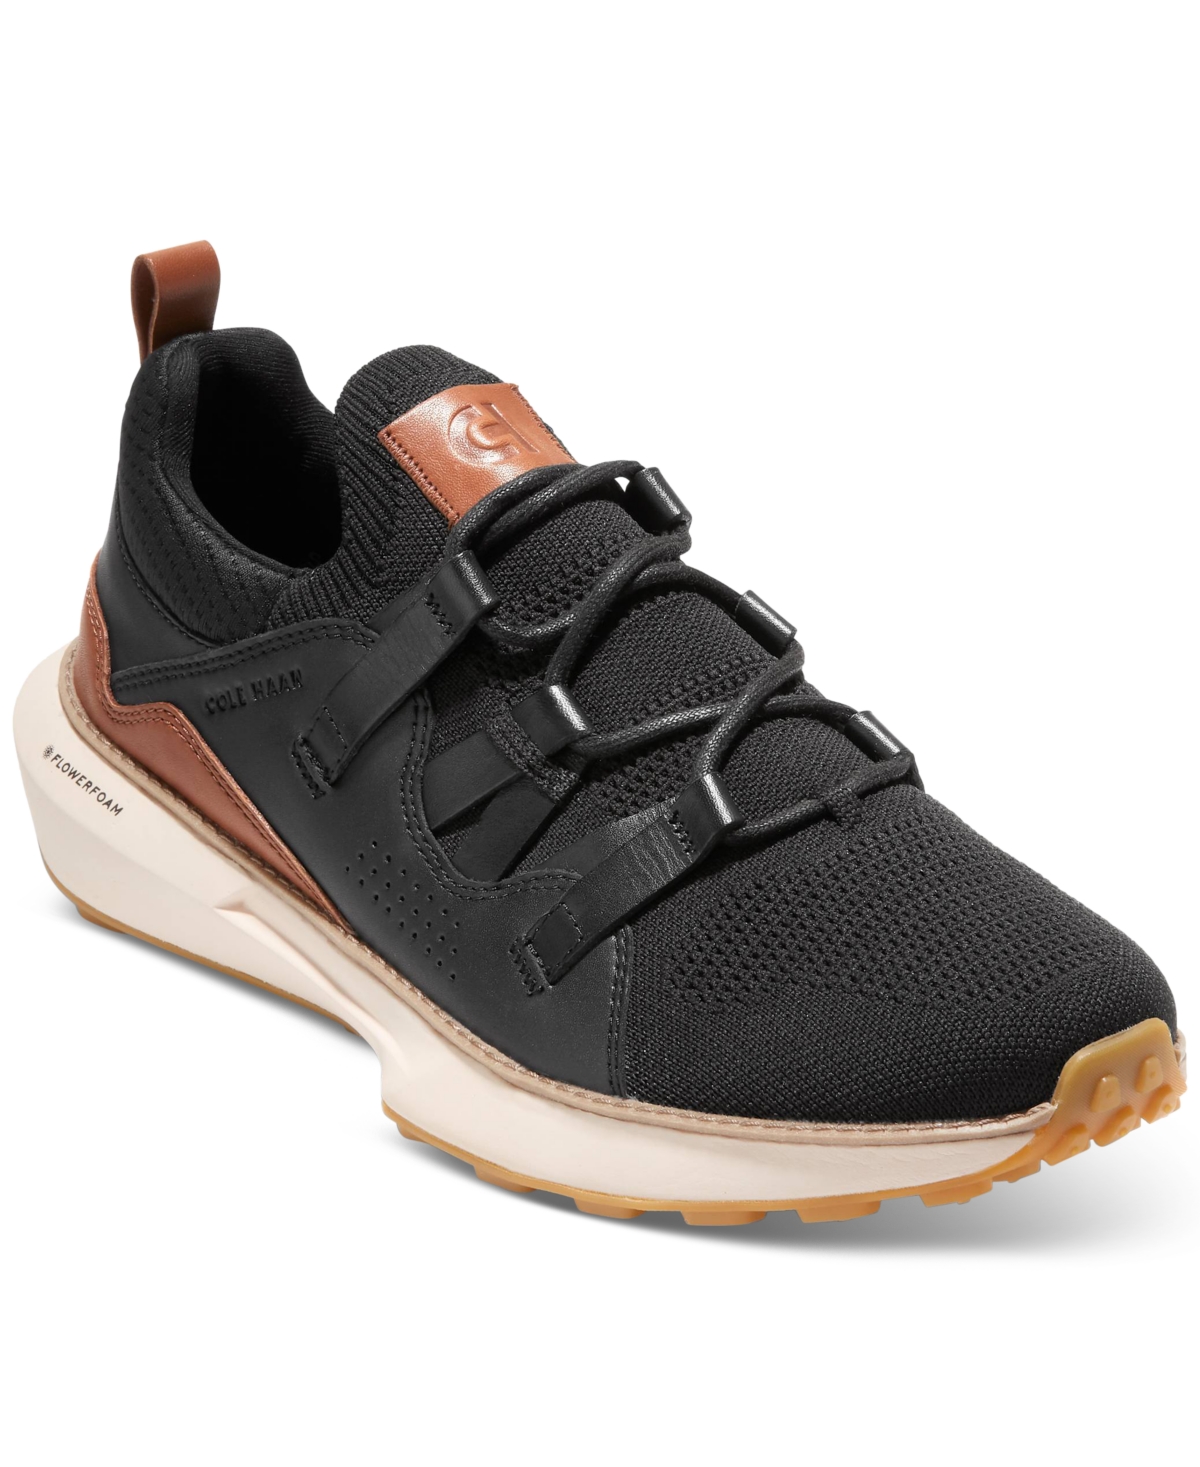 Shop Cole Haan Men's Grandmã¸tion Ii Stitchlite Lace-up Sneakers In Black,british Tan,ivory